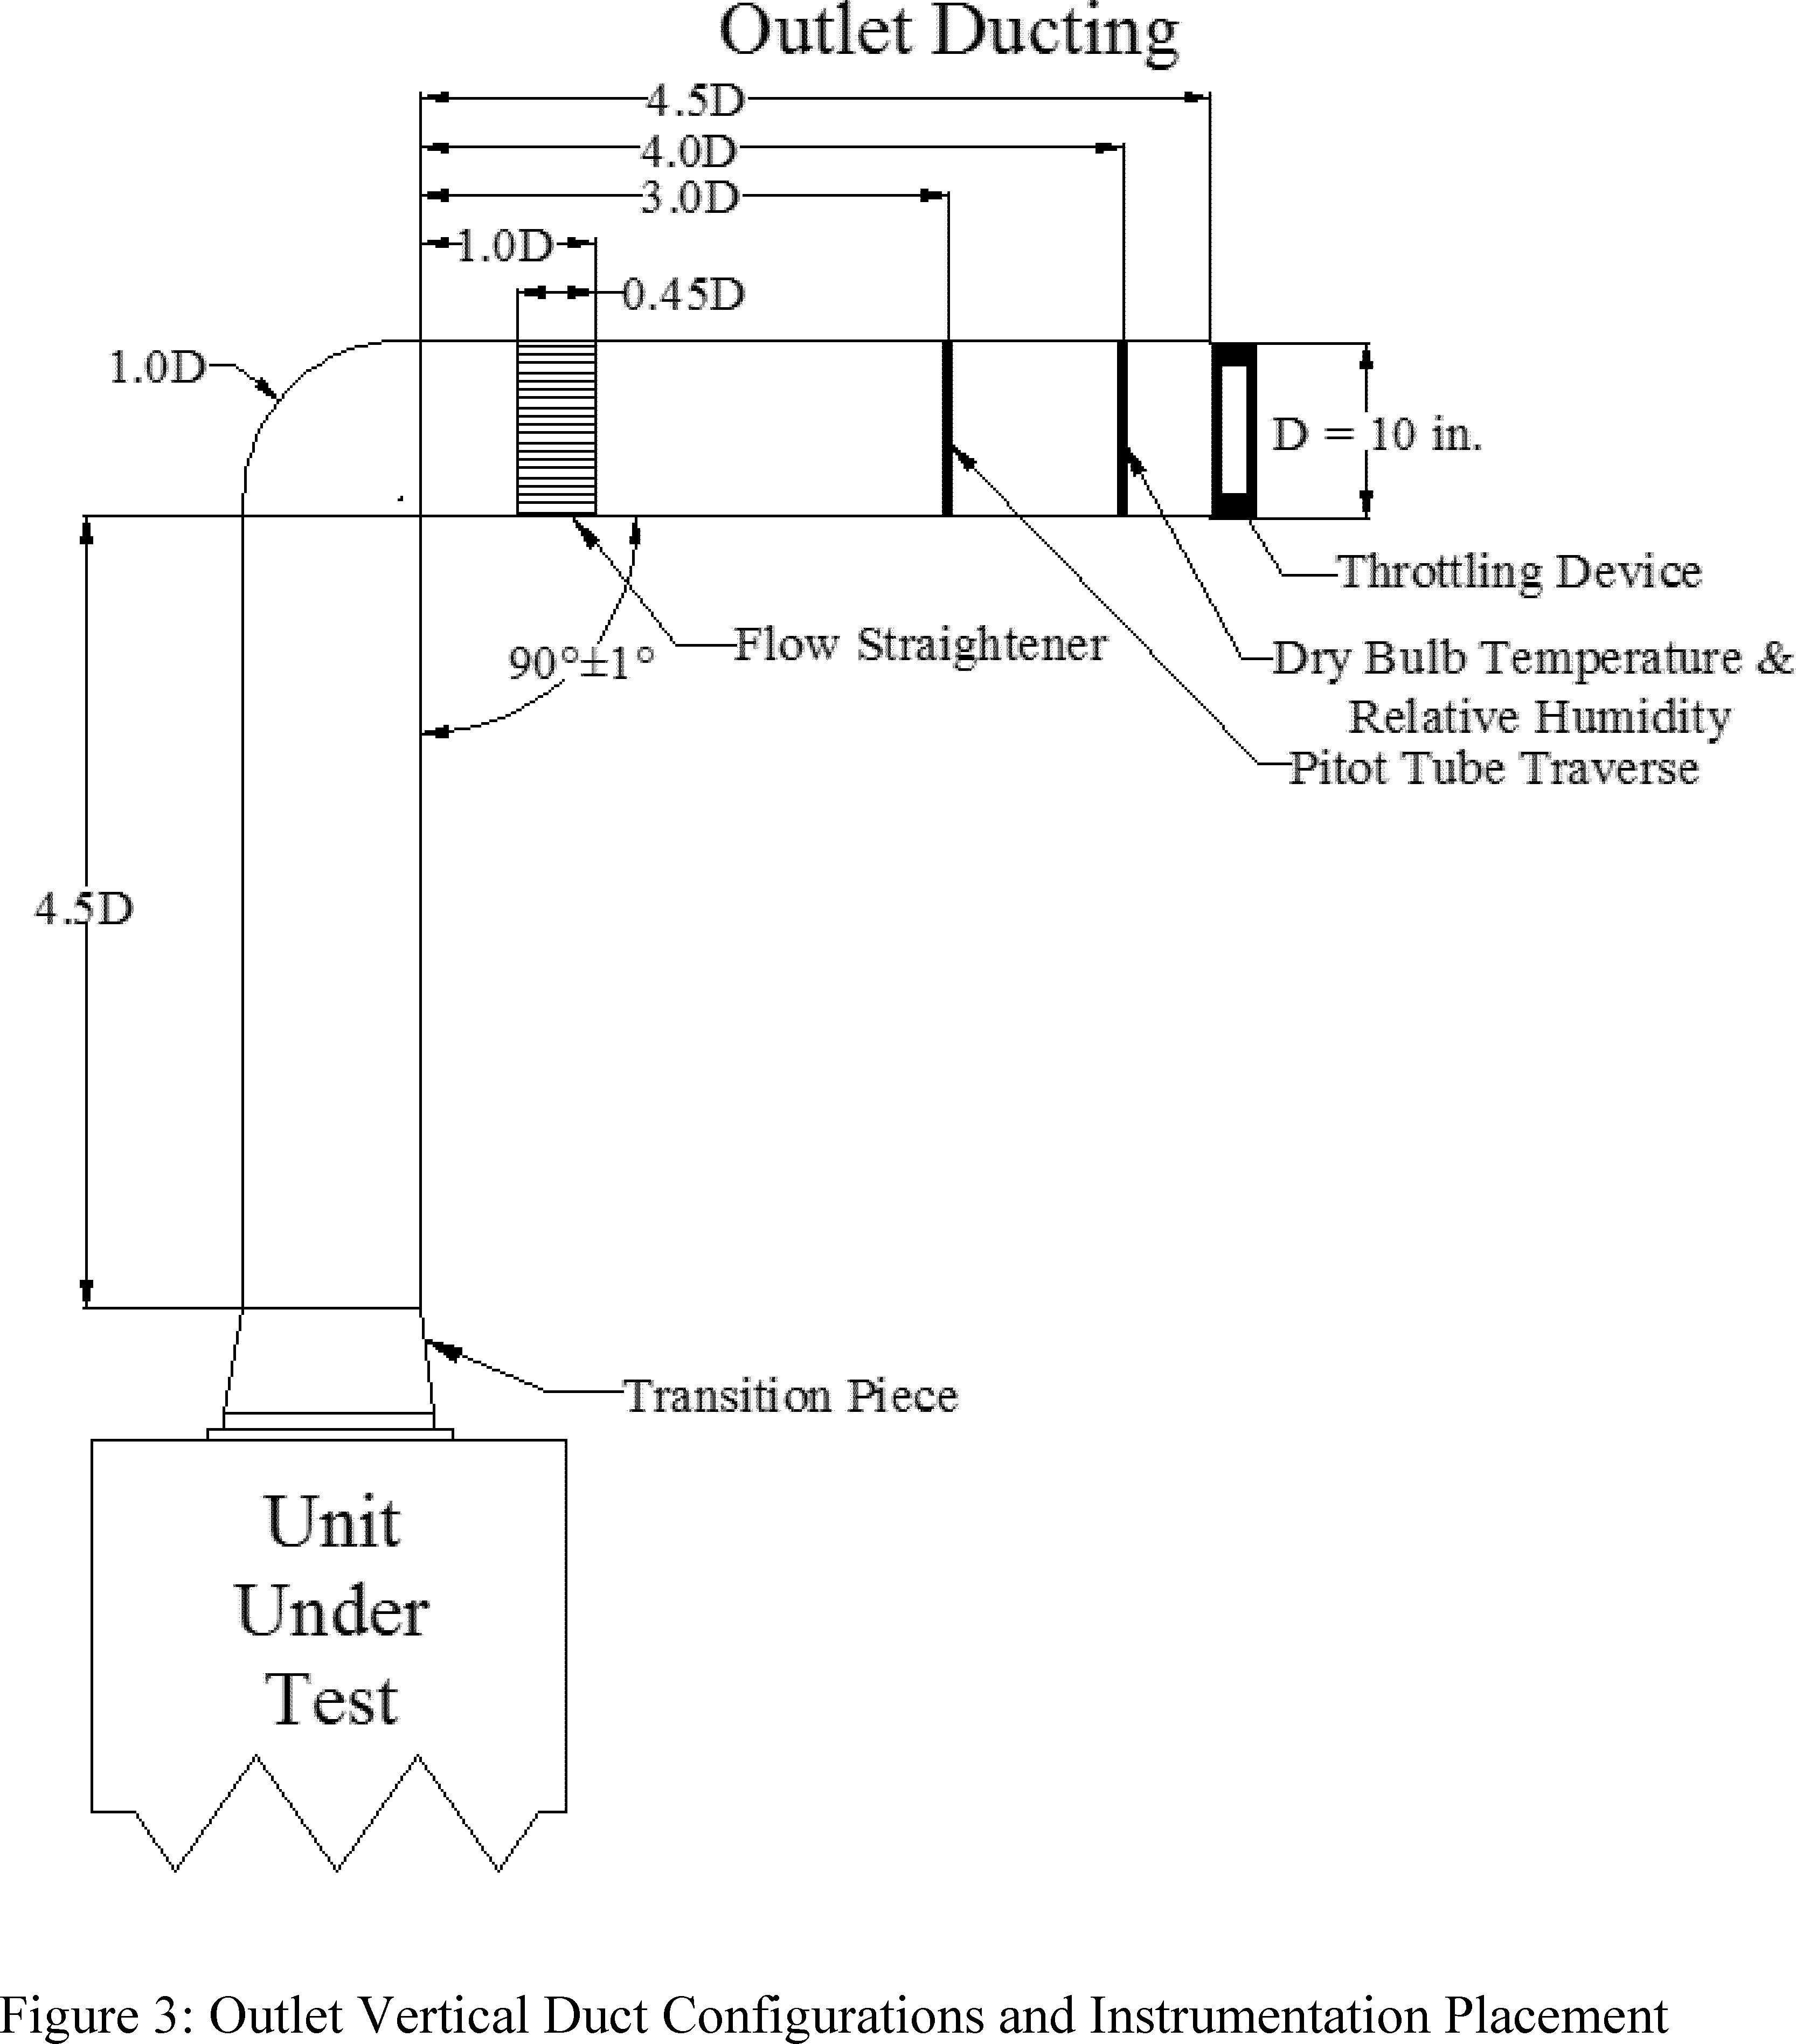 Wiring Diagram for Home Outlet Save Wiring Diagrams for Residential New Mobile Home Ductwork Diagram